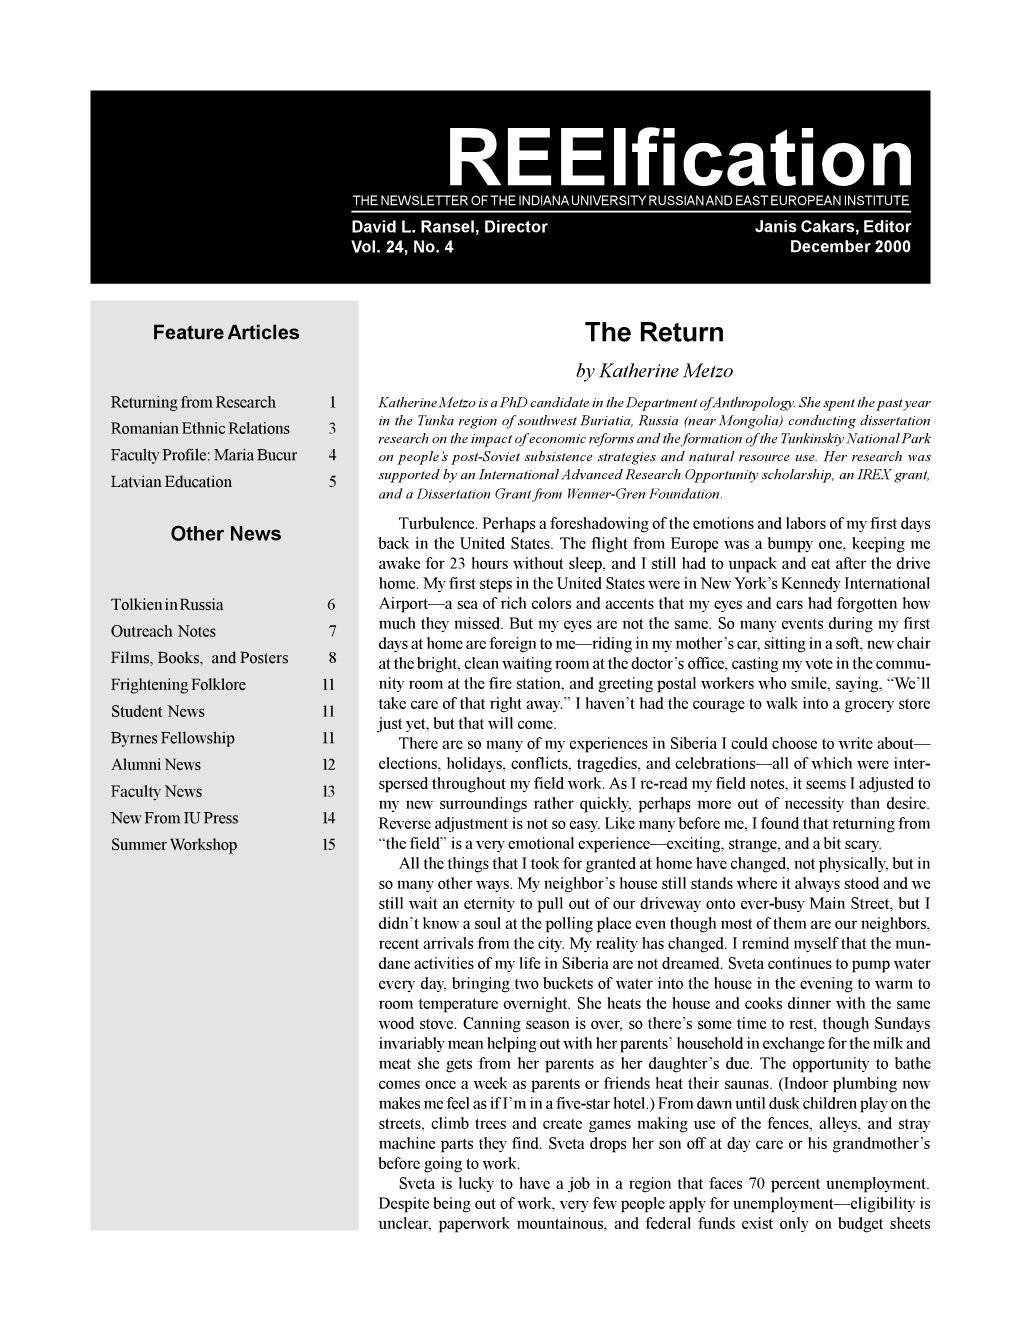 Reeification the NEWSLETTER of the INDIANA UNIVERSITY RUSSIAN and EAST EUROPEAN INSTITUTE David L